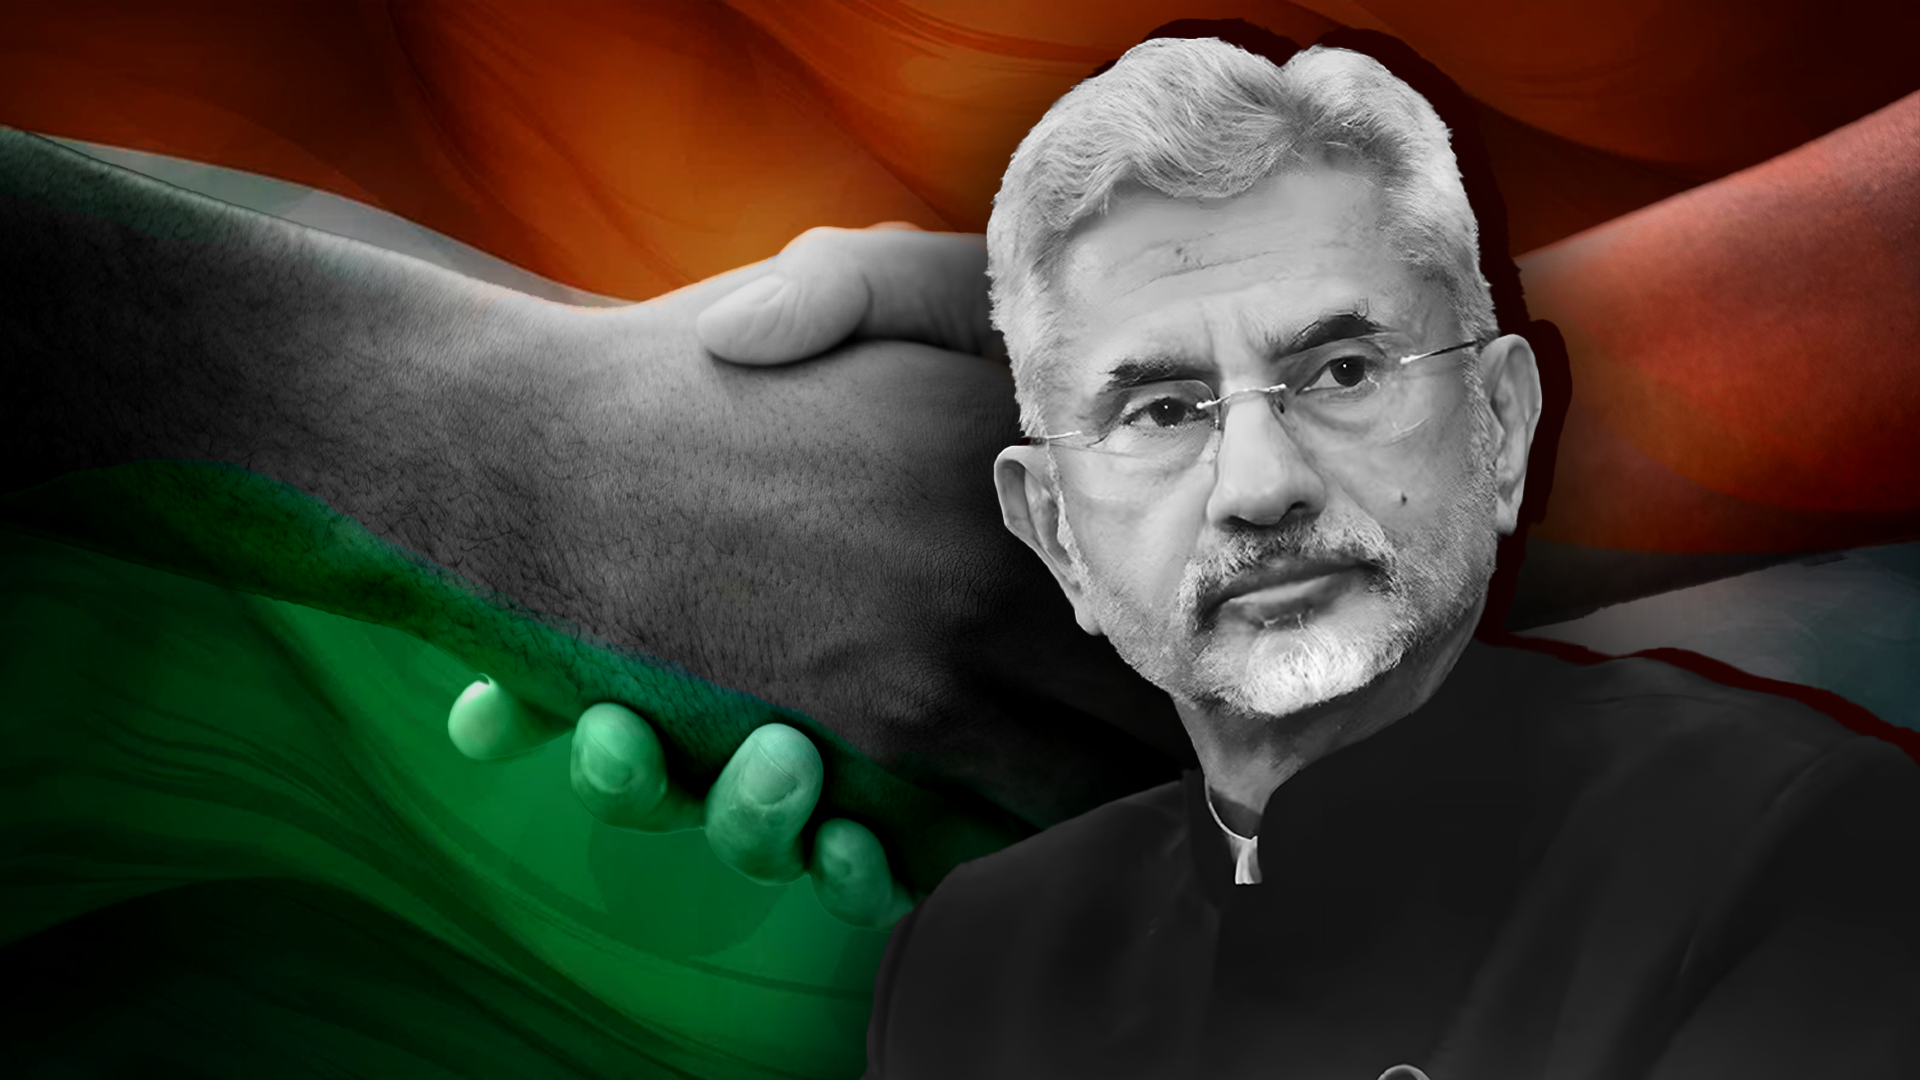 Every Indian should care about foreign policy: S Jaishankar